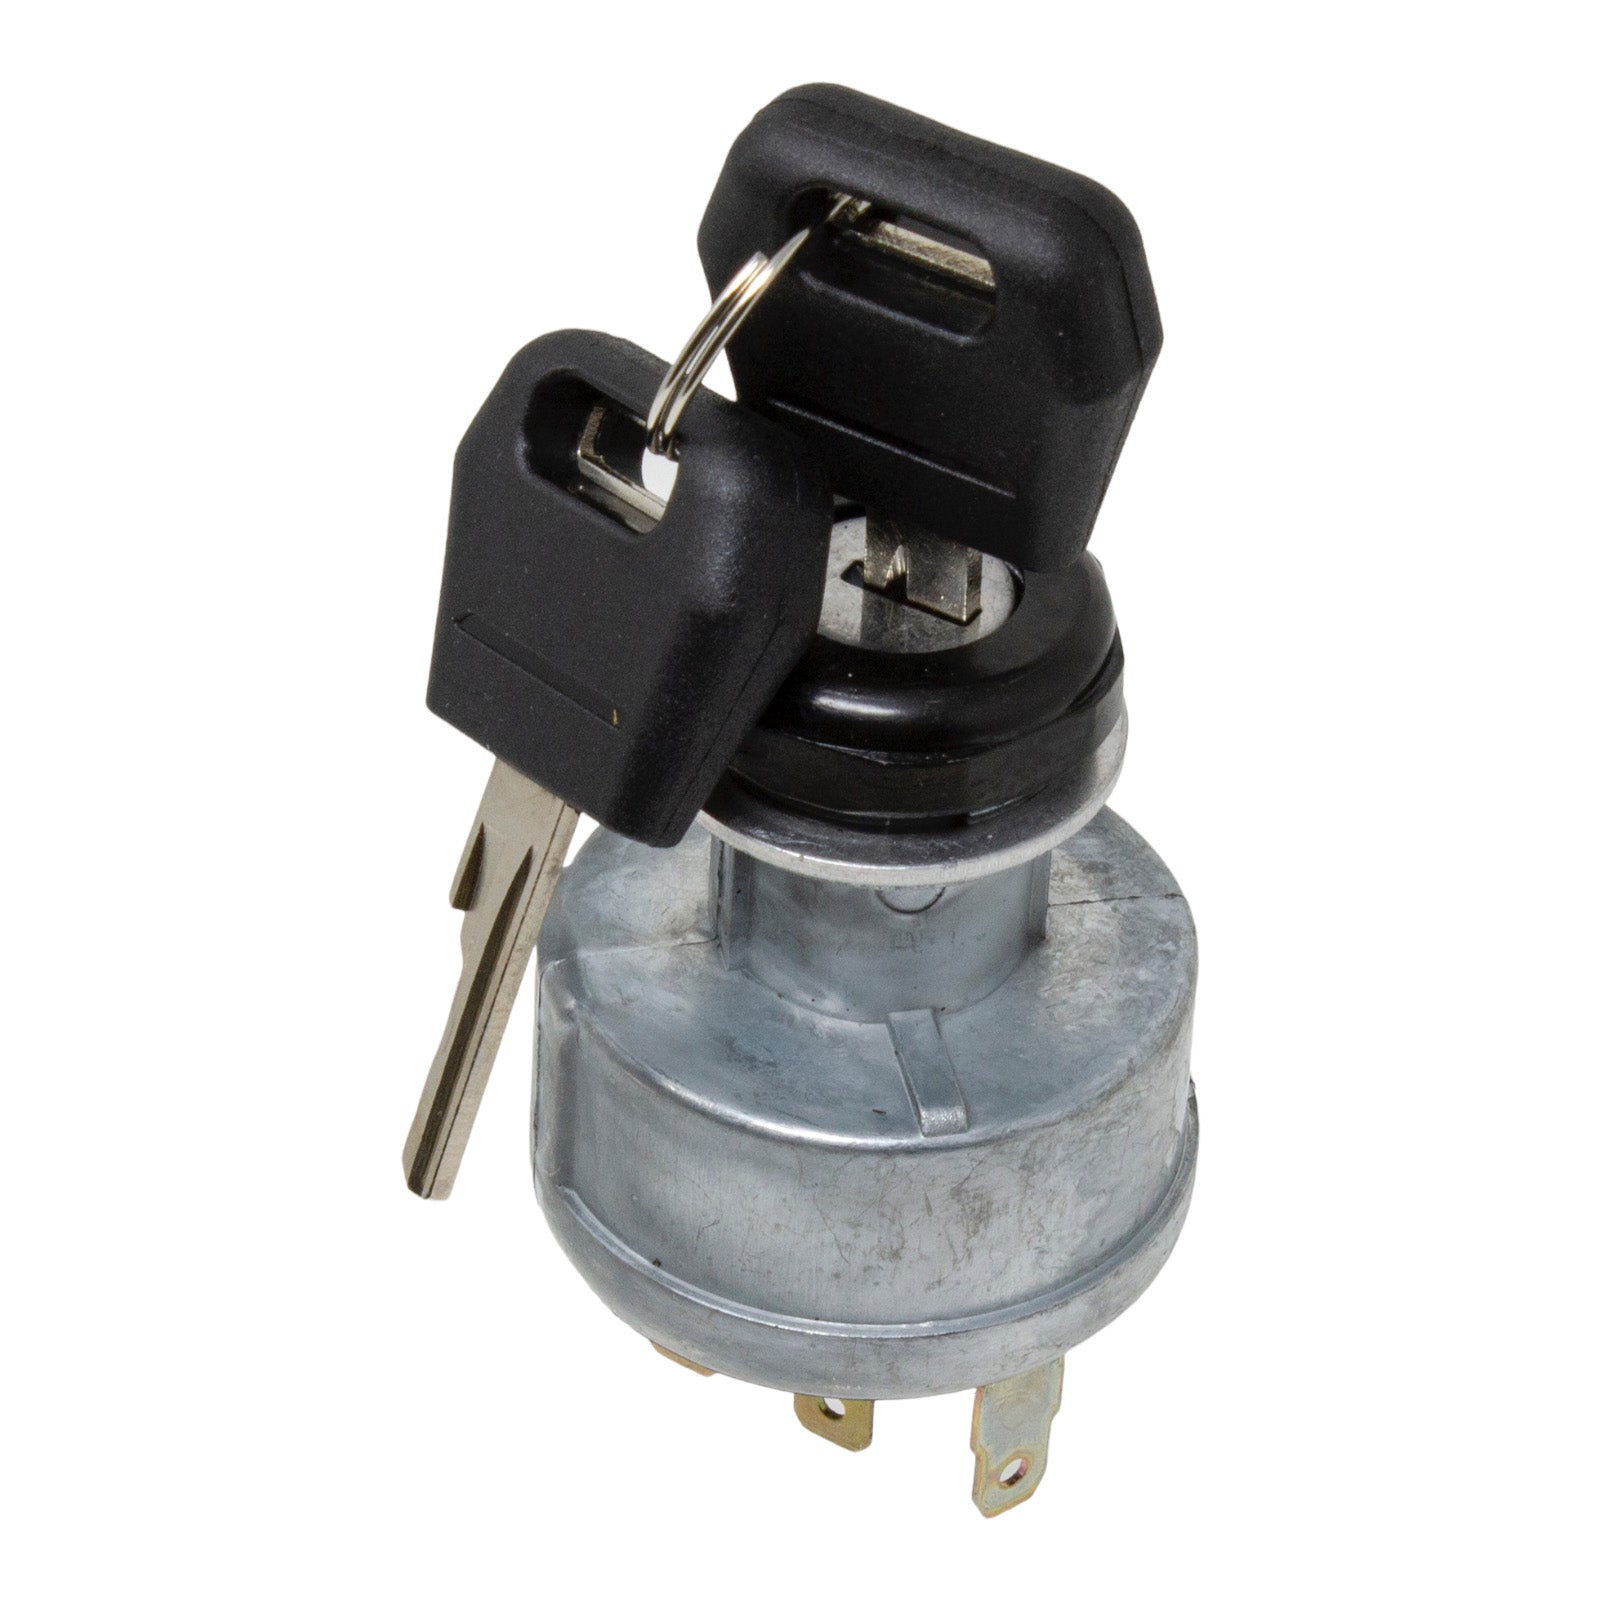 Duraforce A134737, Ignition Switch For Case IH